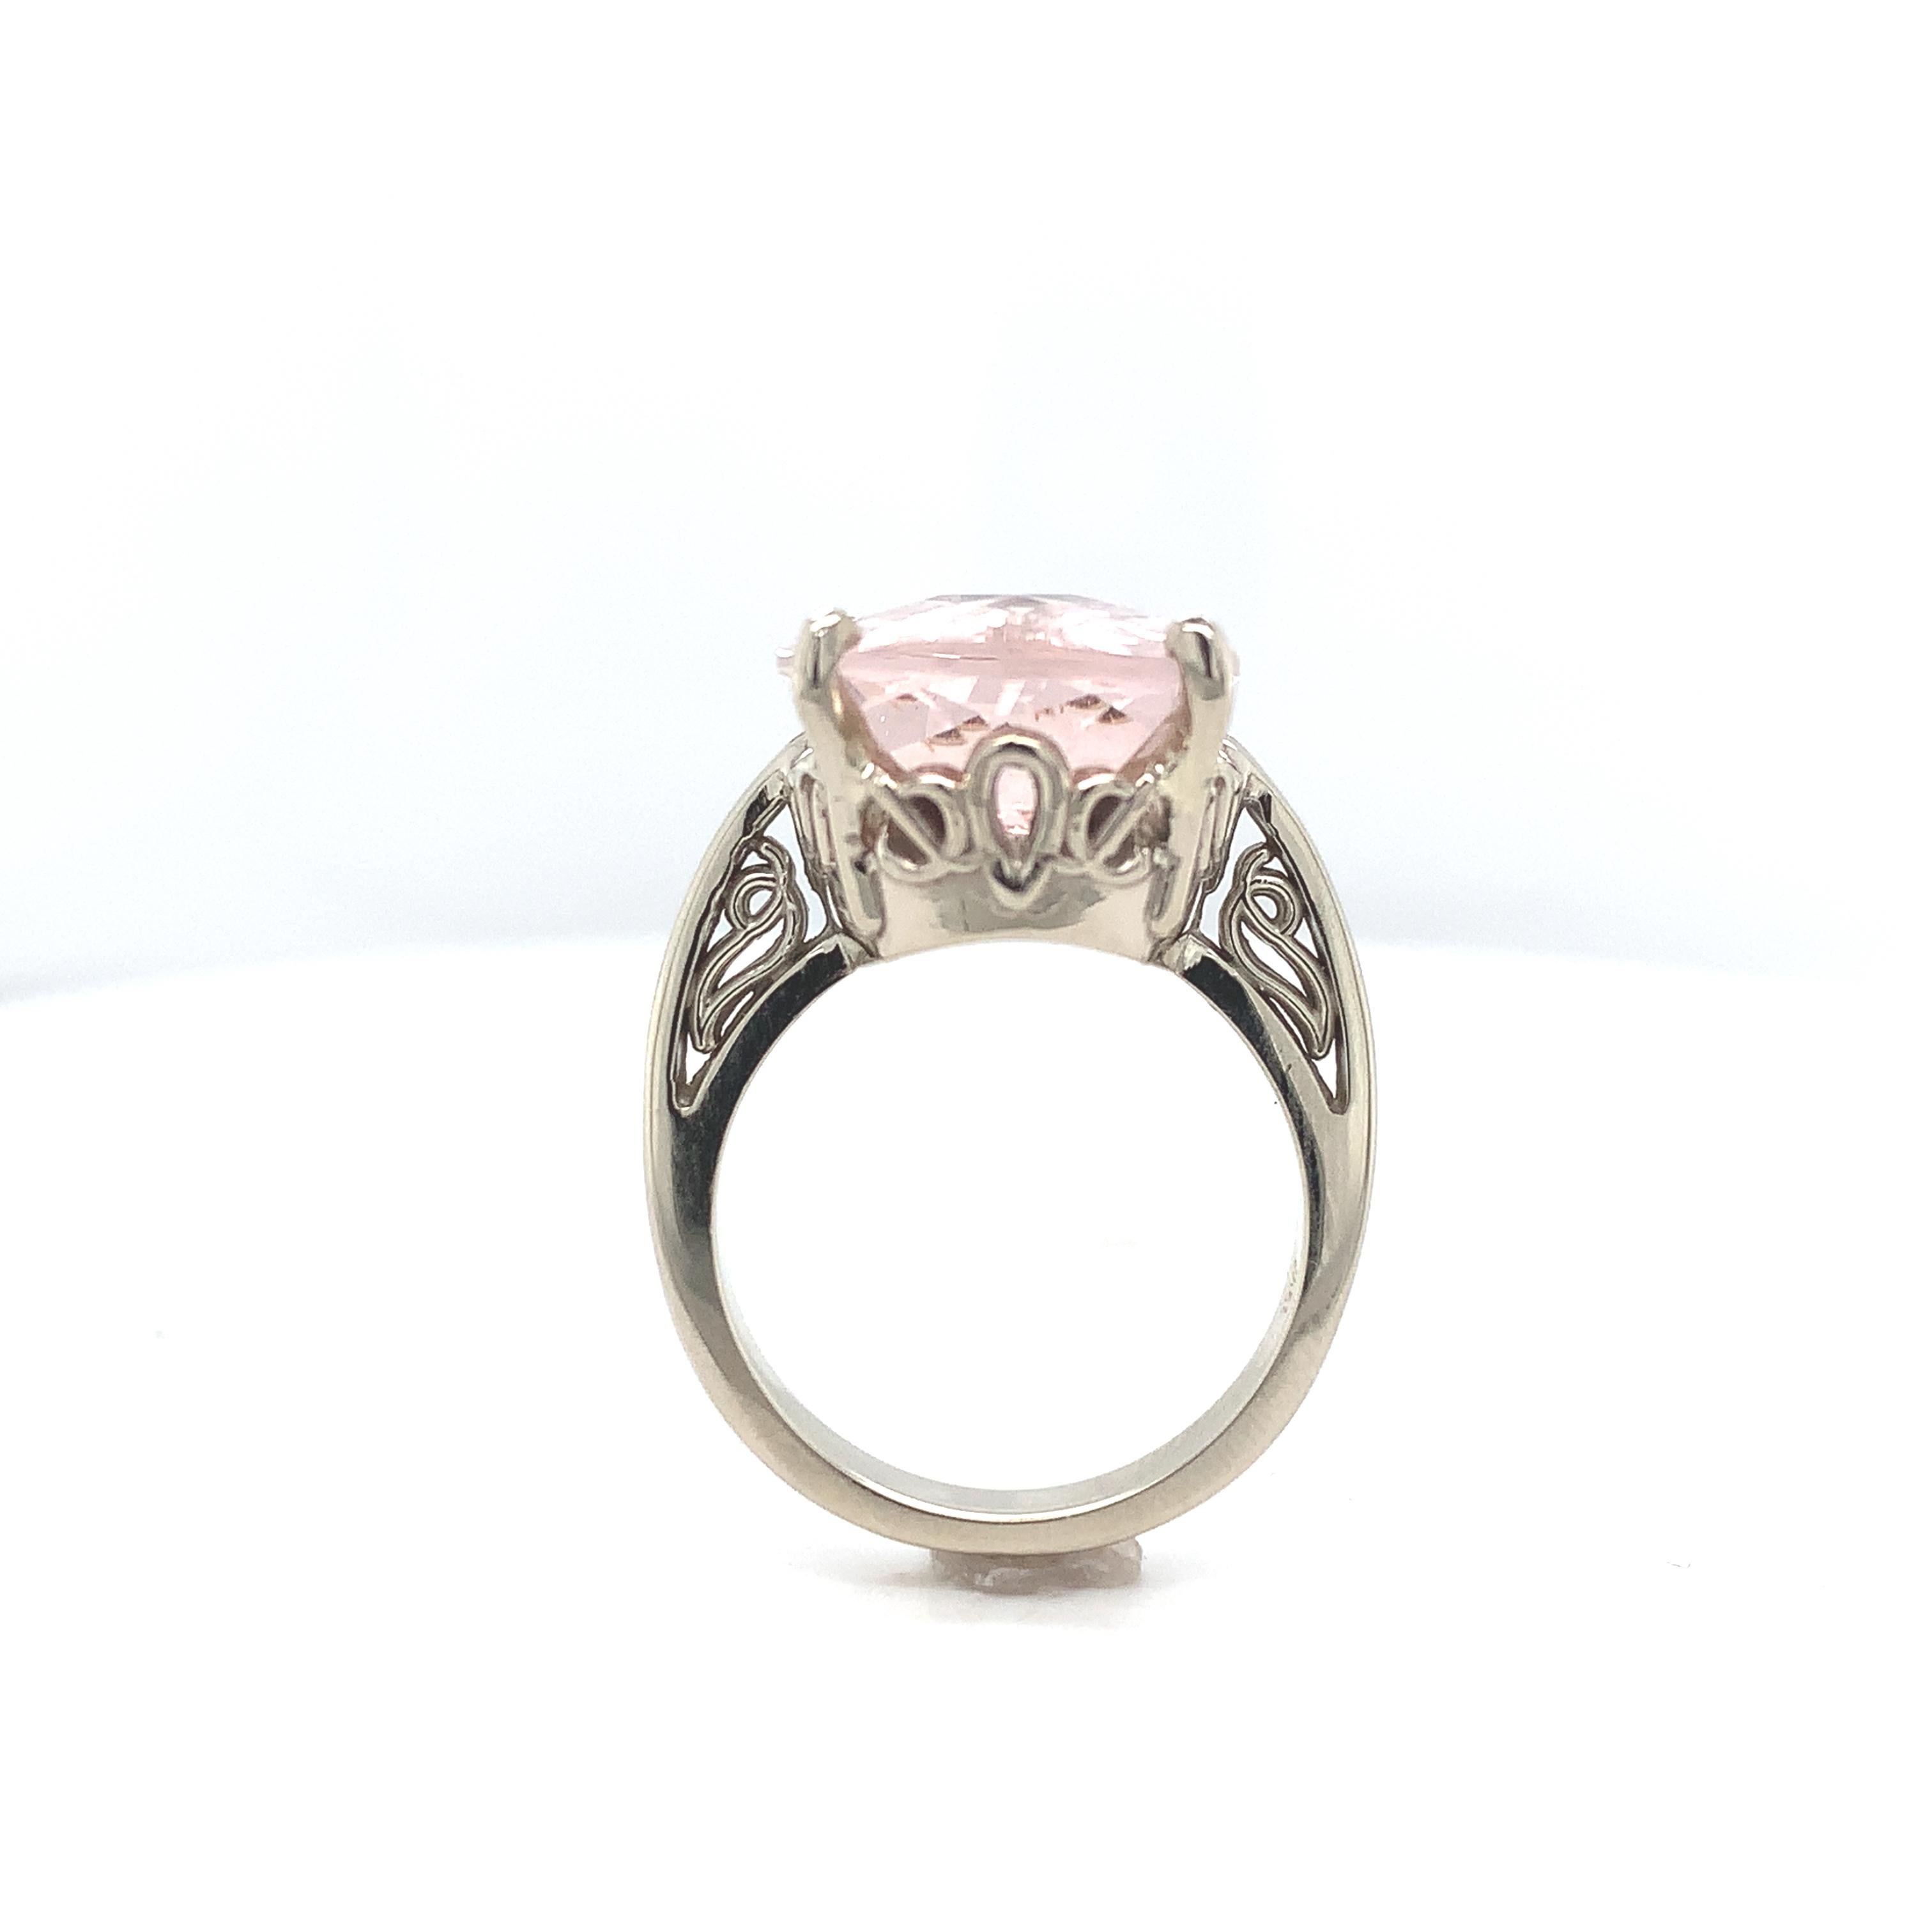 14K white gold ring featuring a large cushion cut morganite weighing 10.85 carats. The genuine earth mined morganite has light pink/peach color and measures about 18mm x 13mm. The morganite has a checkerboard top. Morganite is the peach or pink